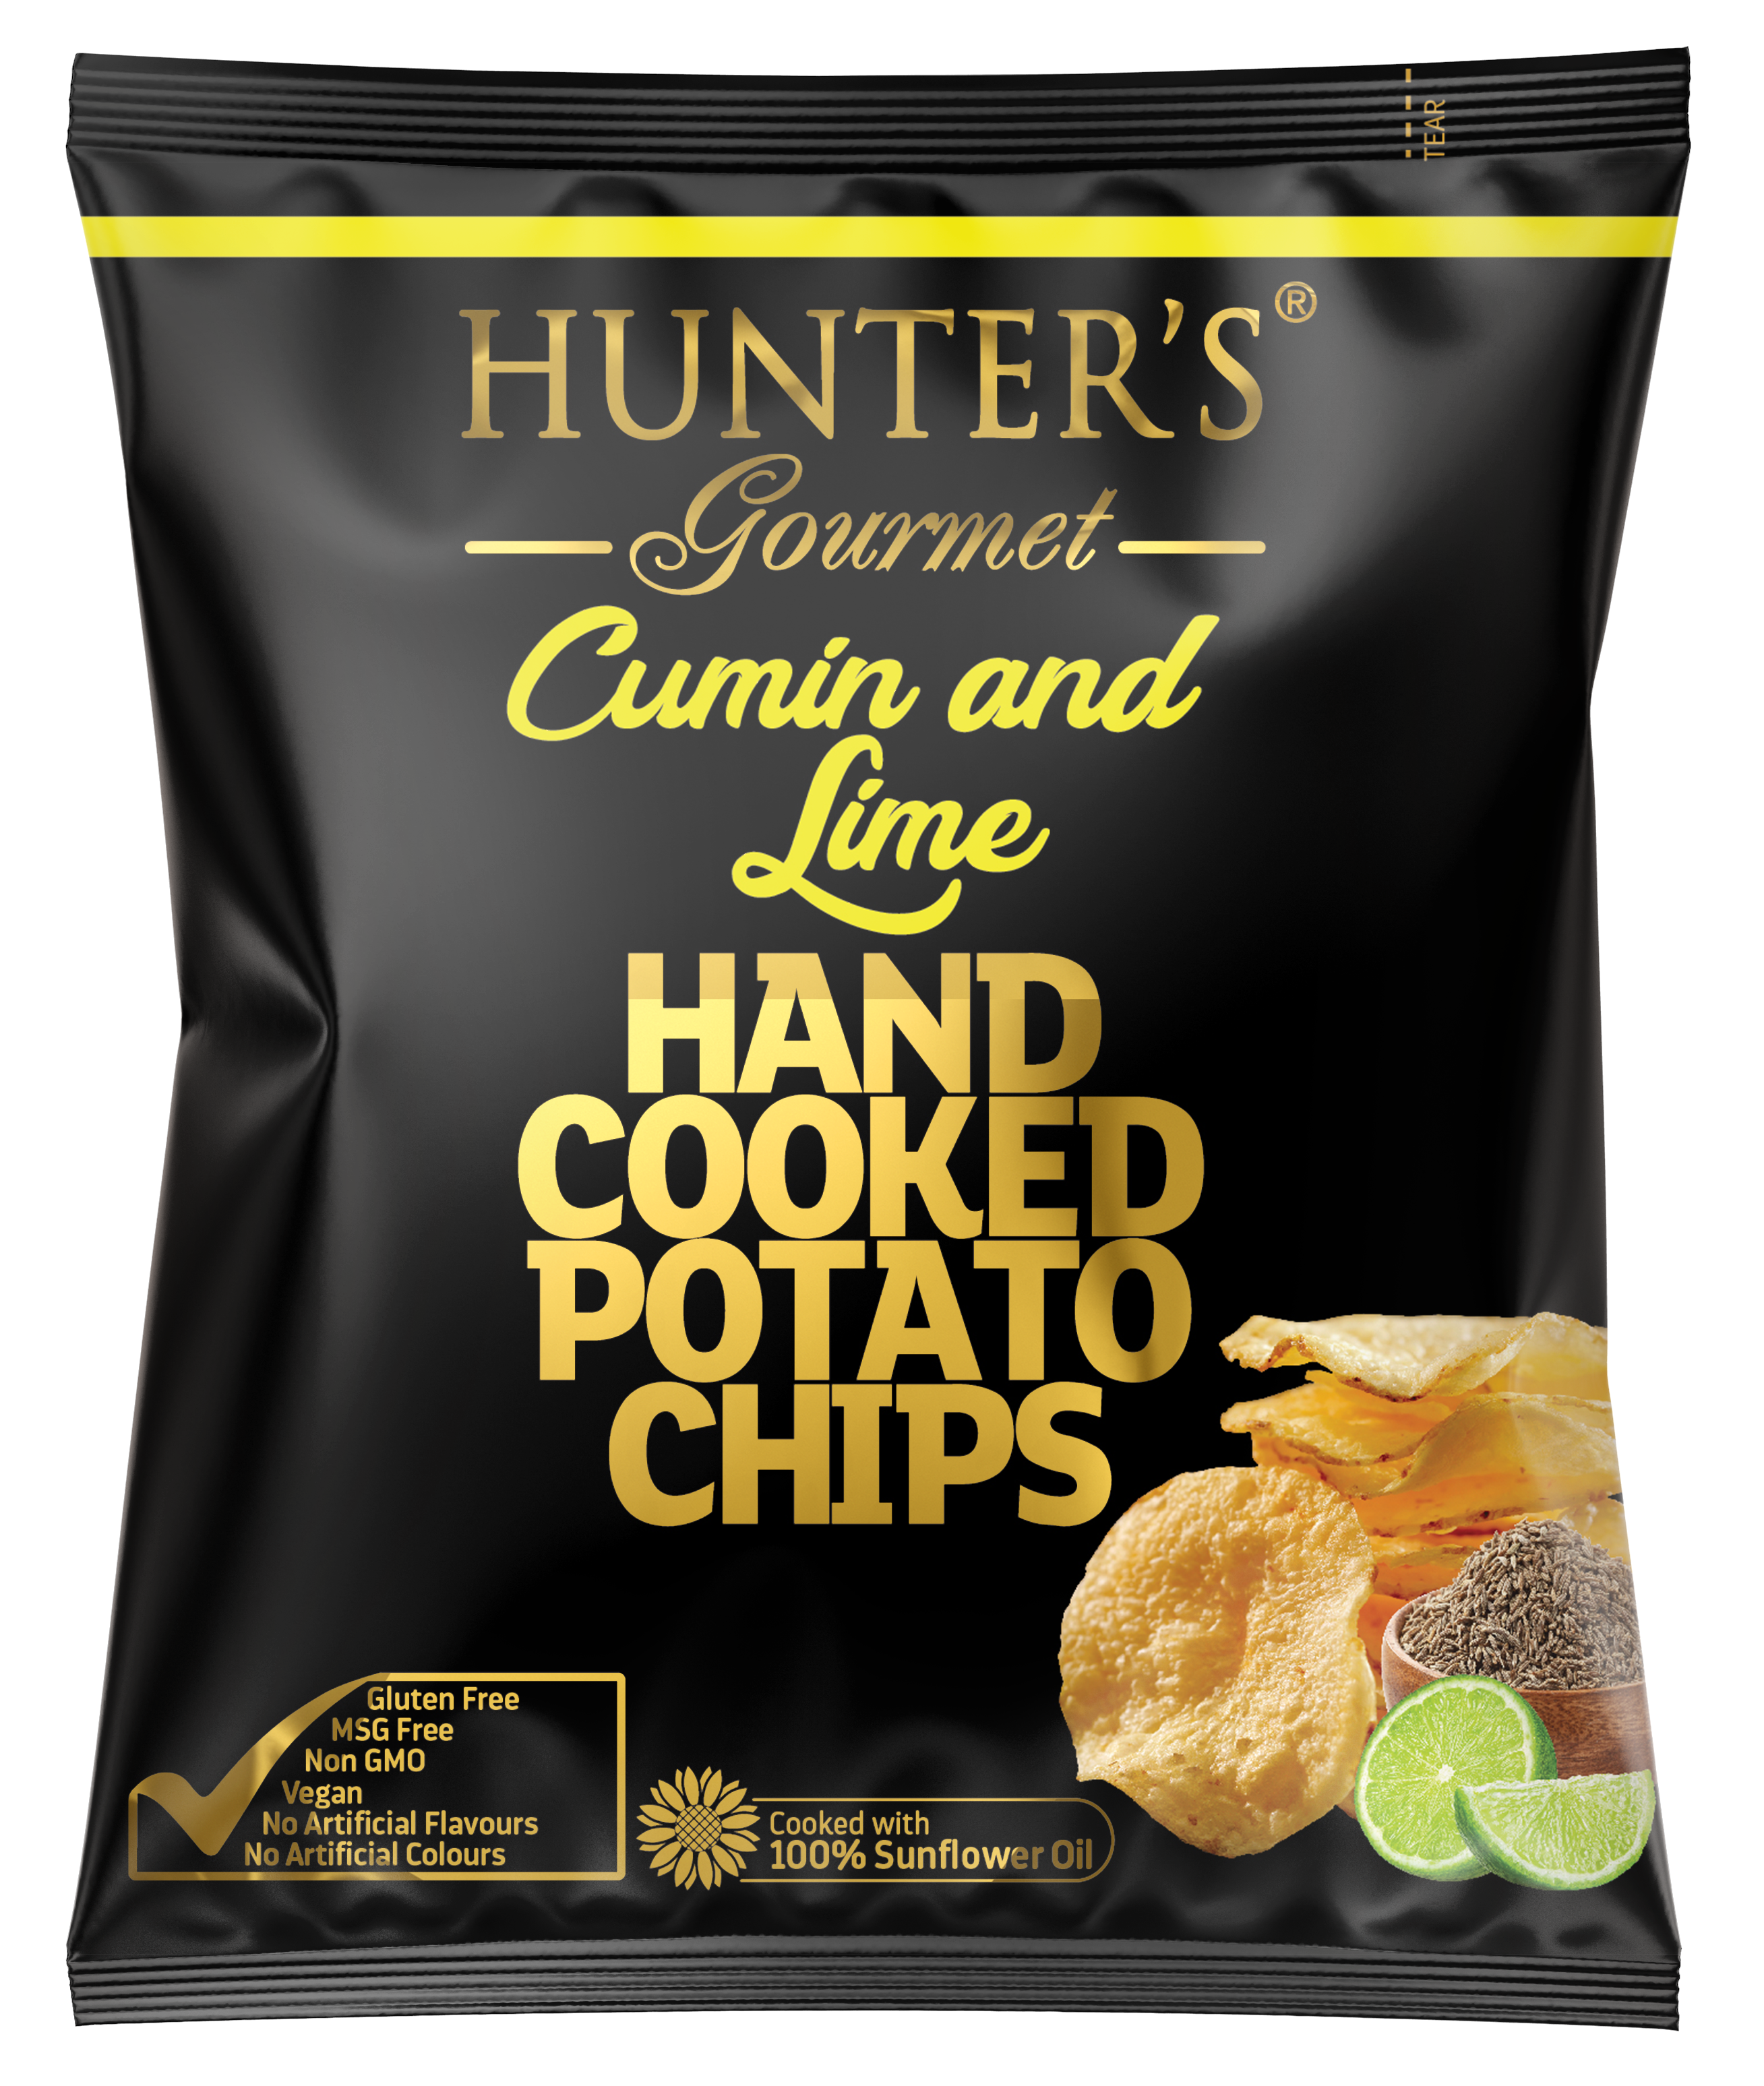 Hunter's Gourmet Hand Cooked Potato Chips Cumin and Lime 50 units per case 25 g